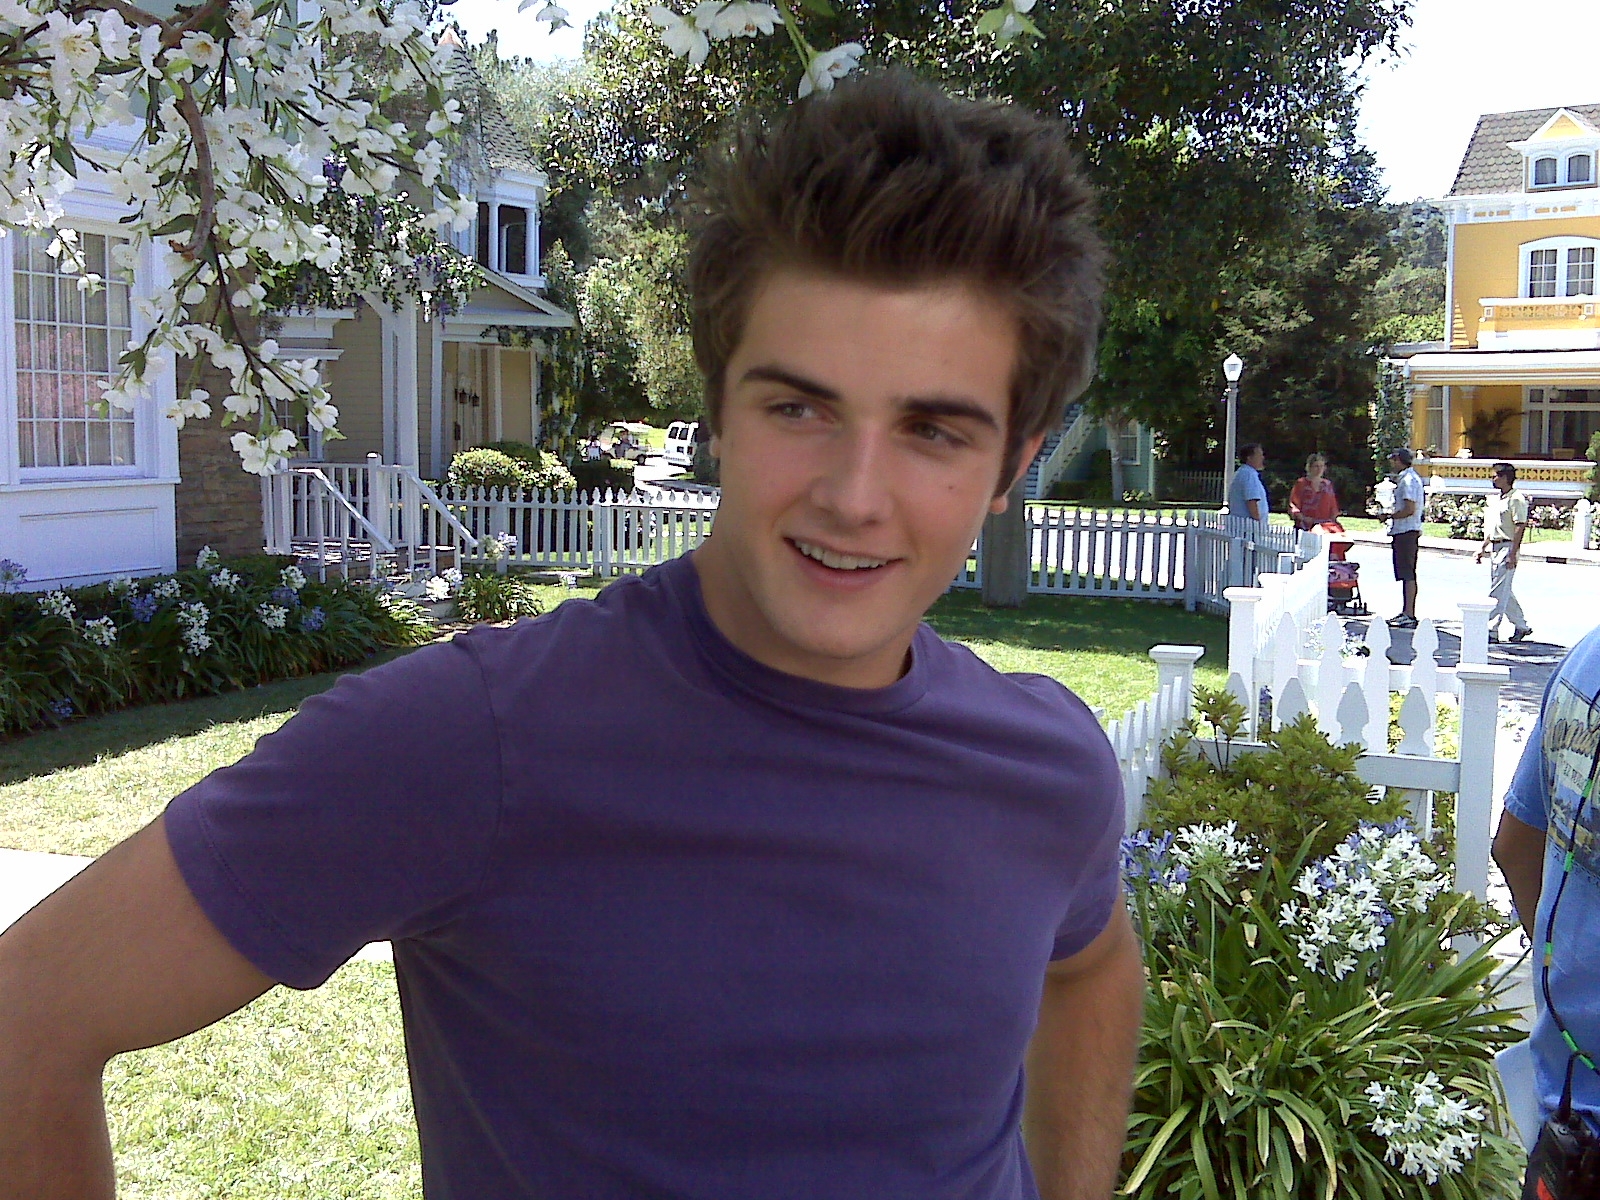 Beau on set of Desperate Housewives